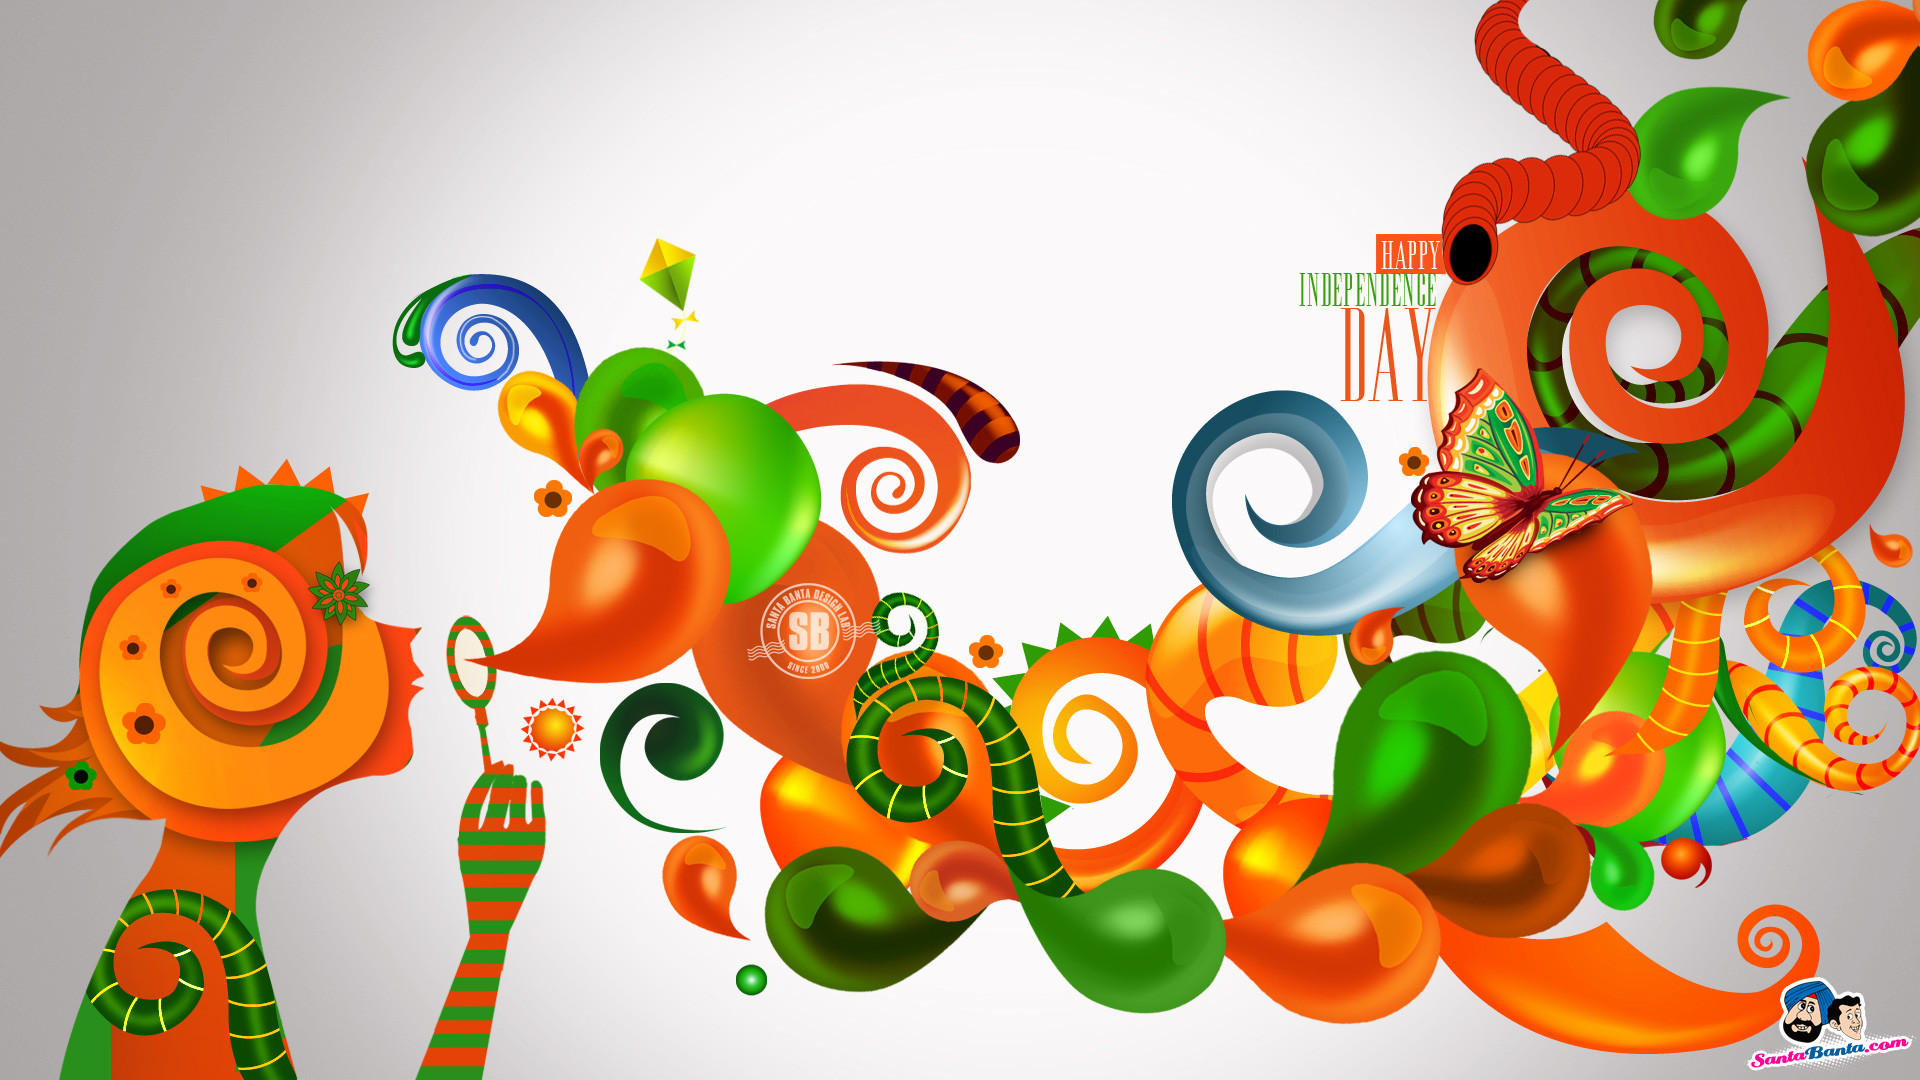 India Hd Wallpapers 1080p - India Independence Day Greetings - HD Wallpaper 